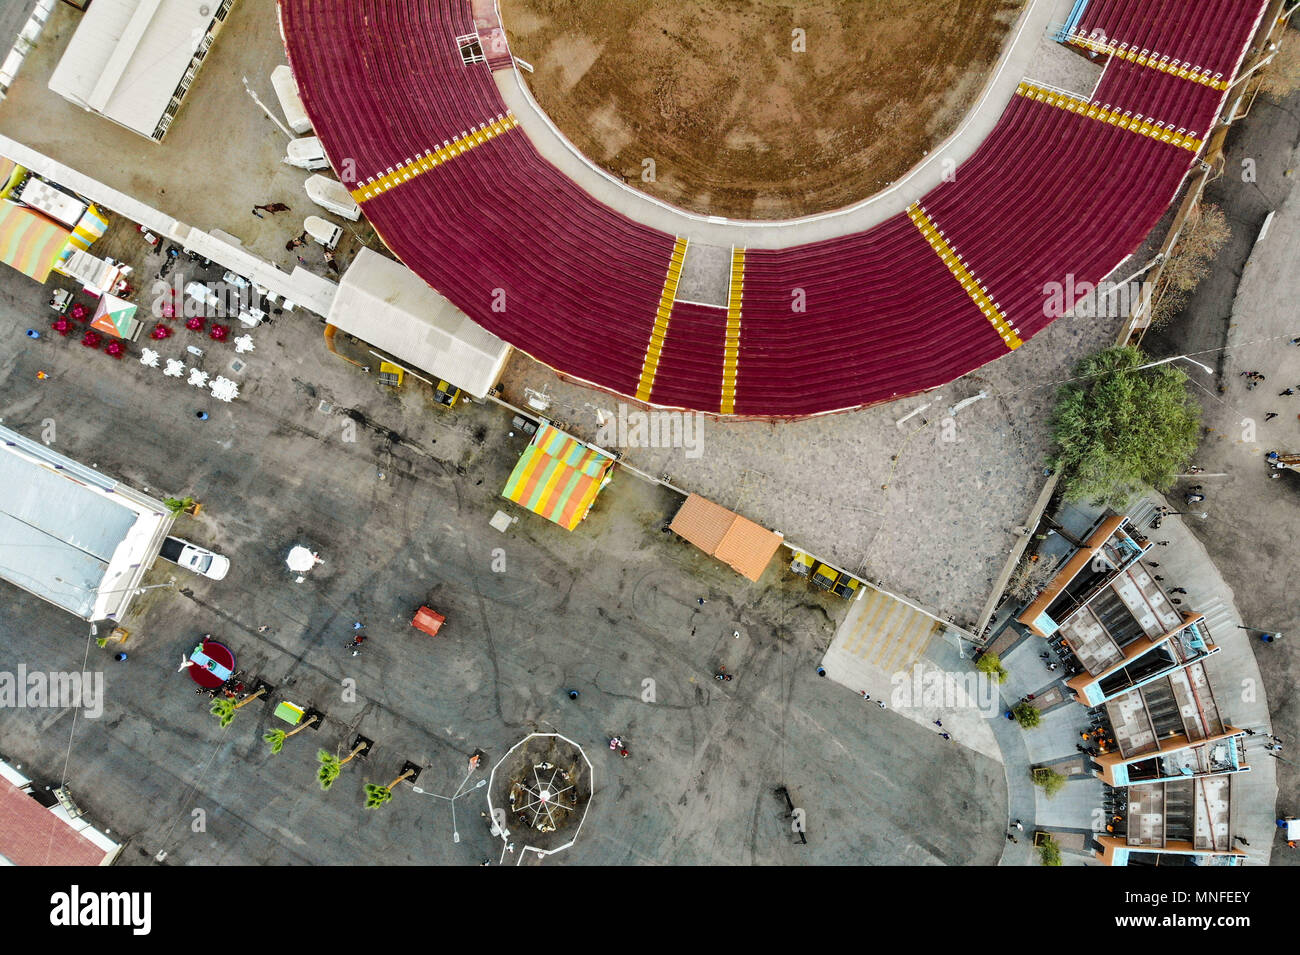 Aerial view of the Rodeo arena, rides and facilities and corrals of the